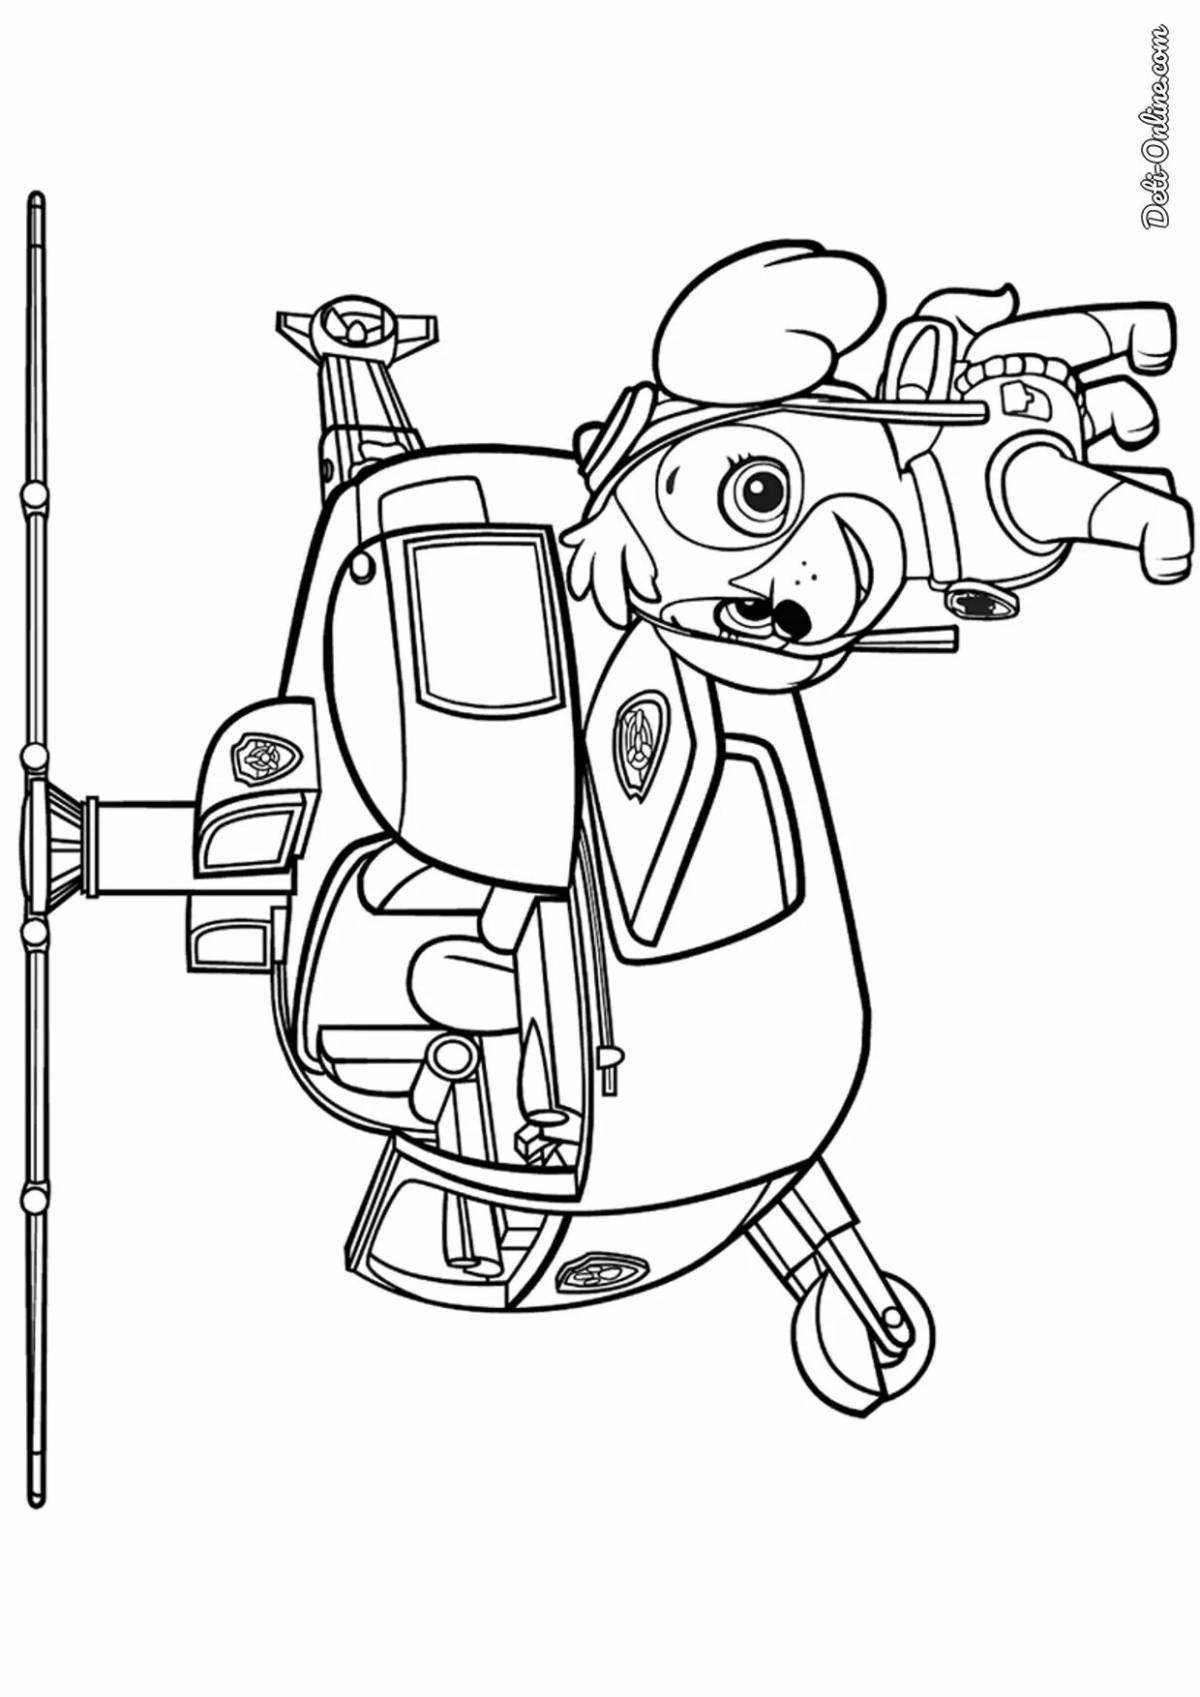 Adorable Rescue Helicopter Coloring Page